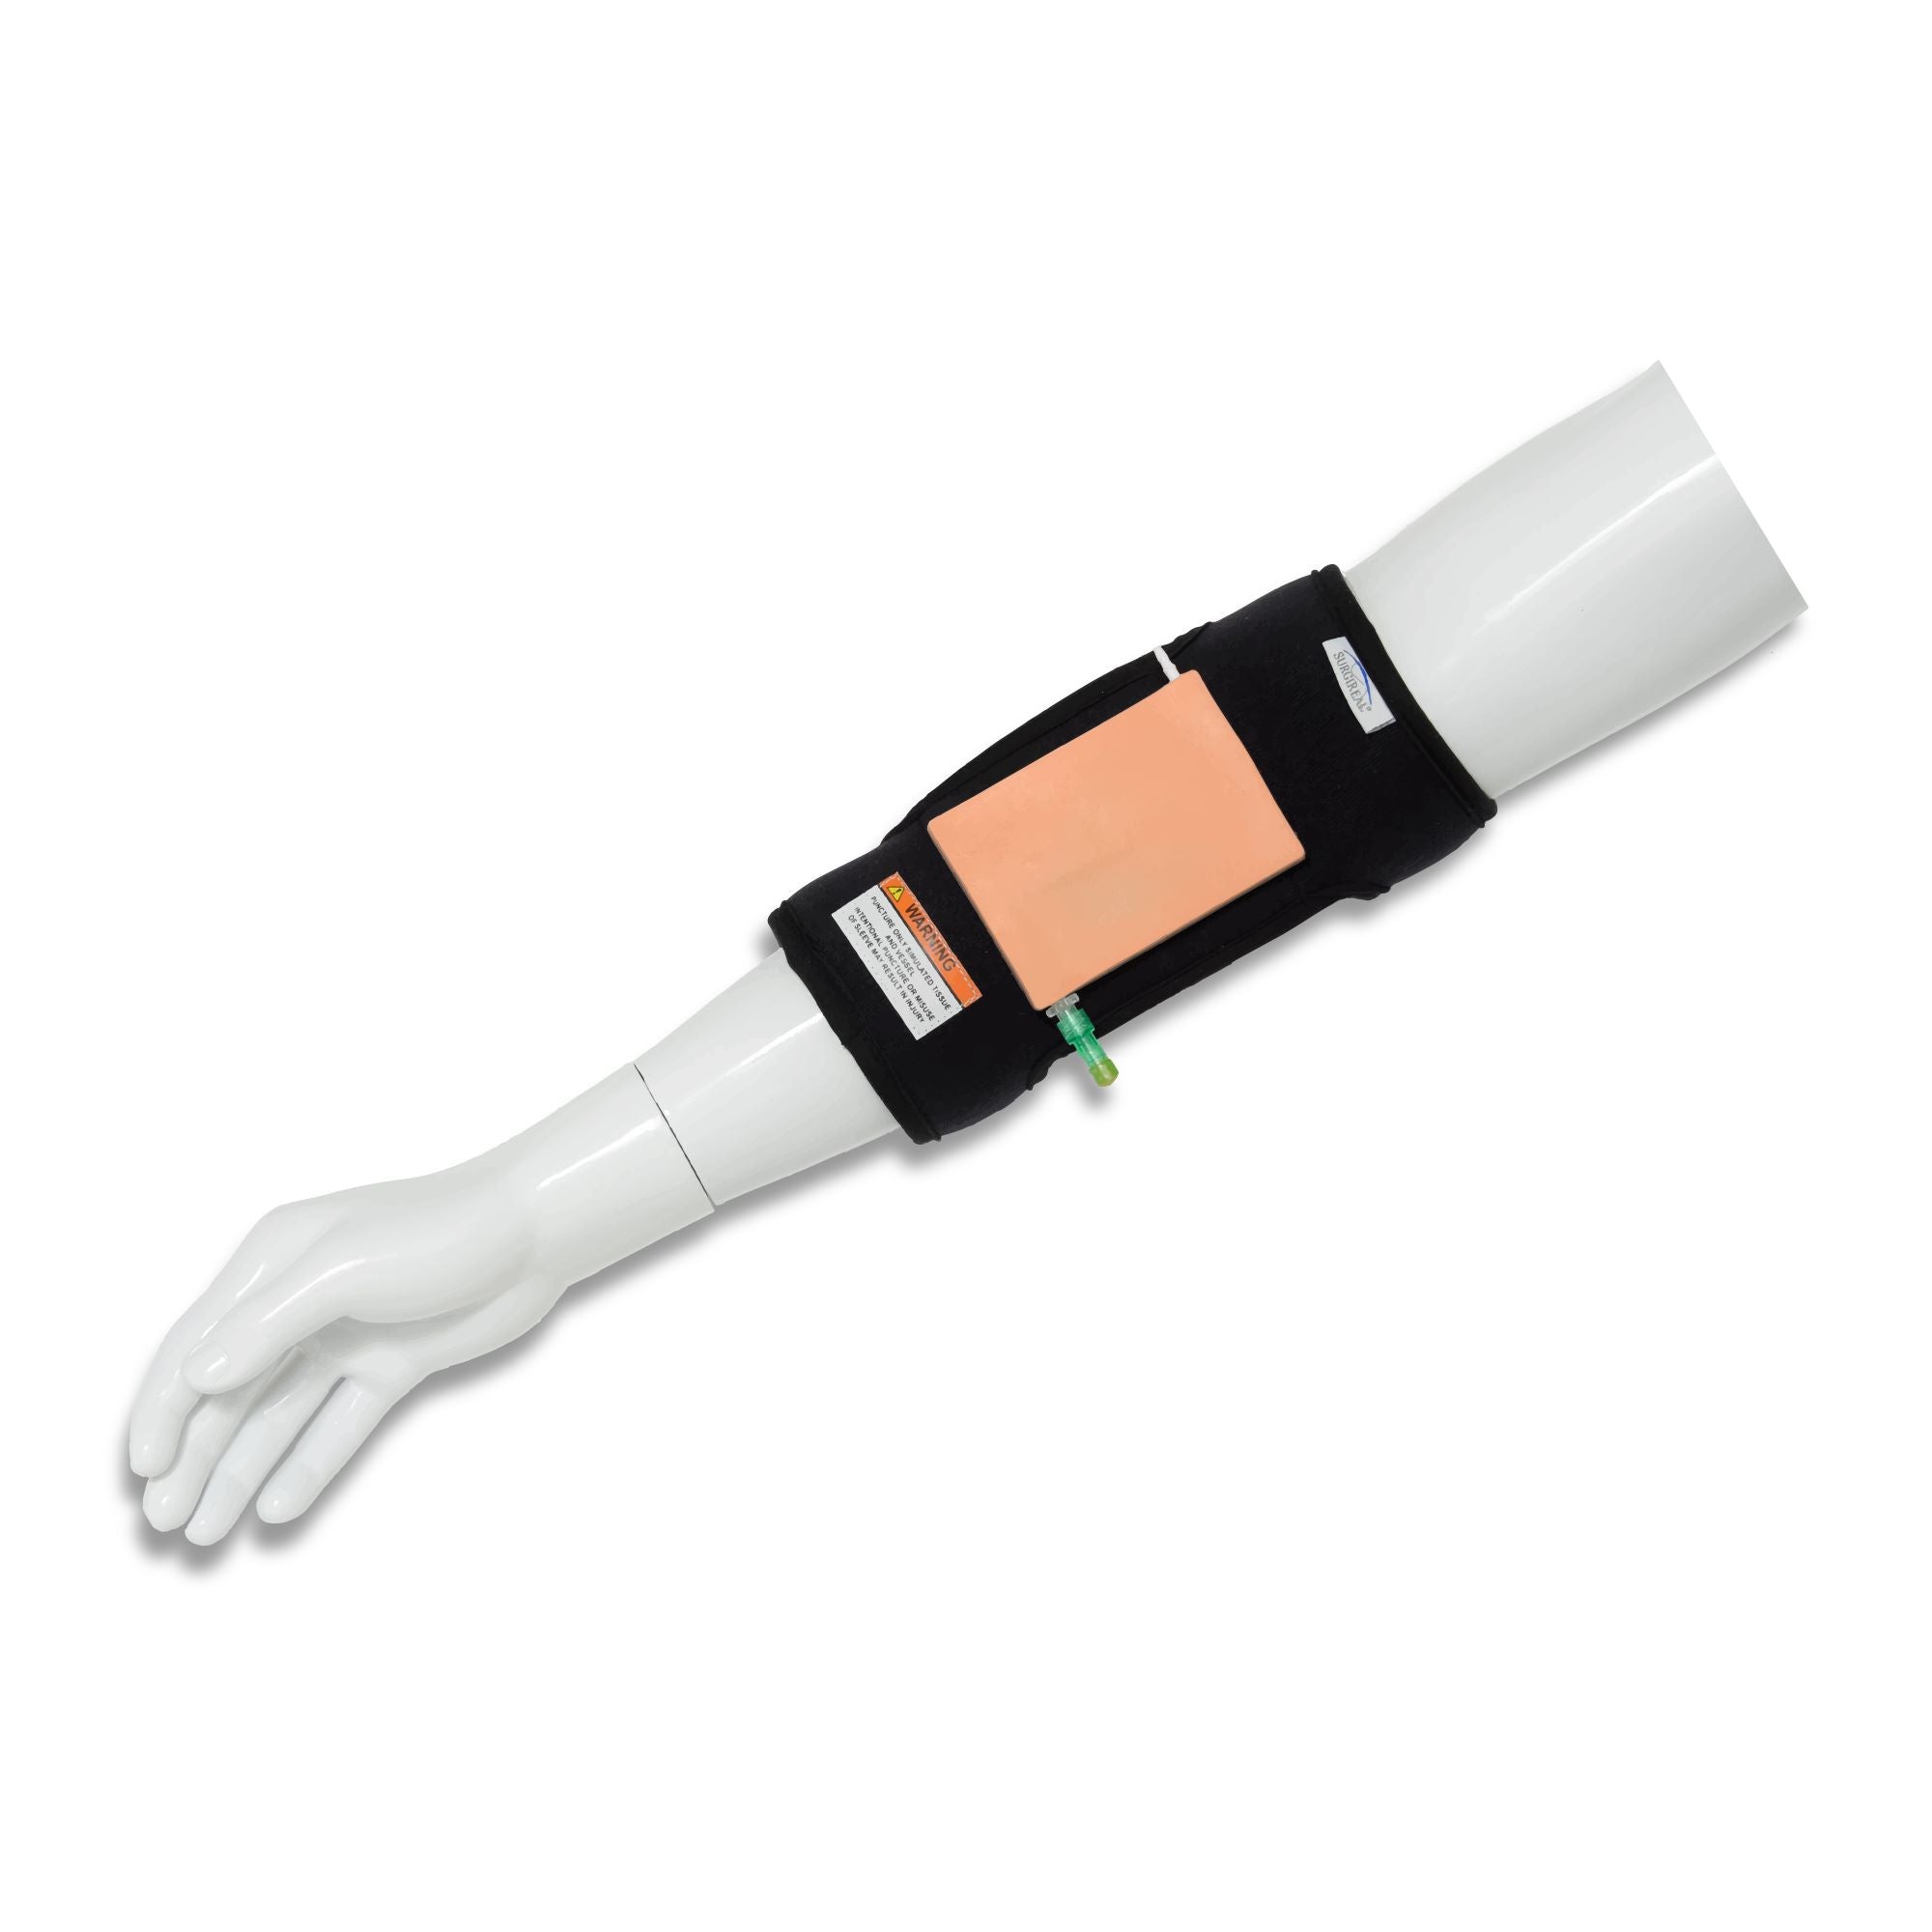 Wearable simulated IV and blood draw trainer with puncture resistant material to make it safe for all participants sold by SurgiReal. Great for phlebotomy training!